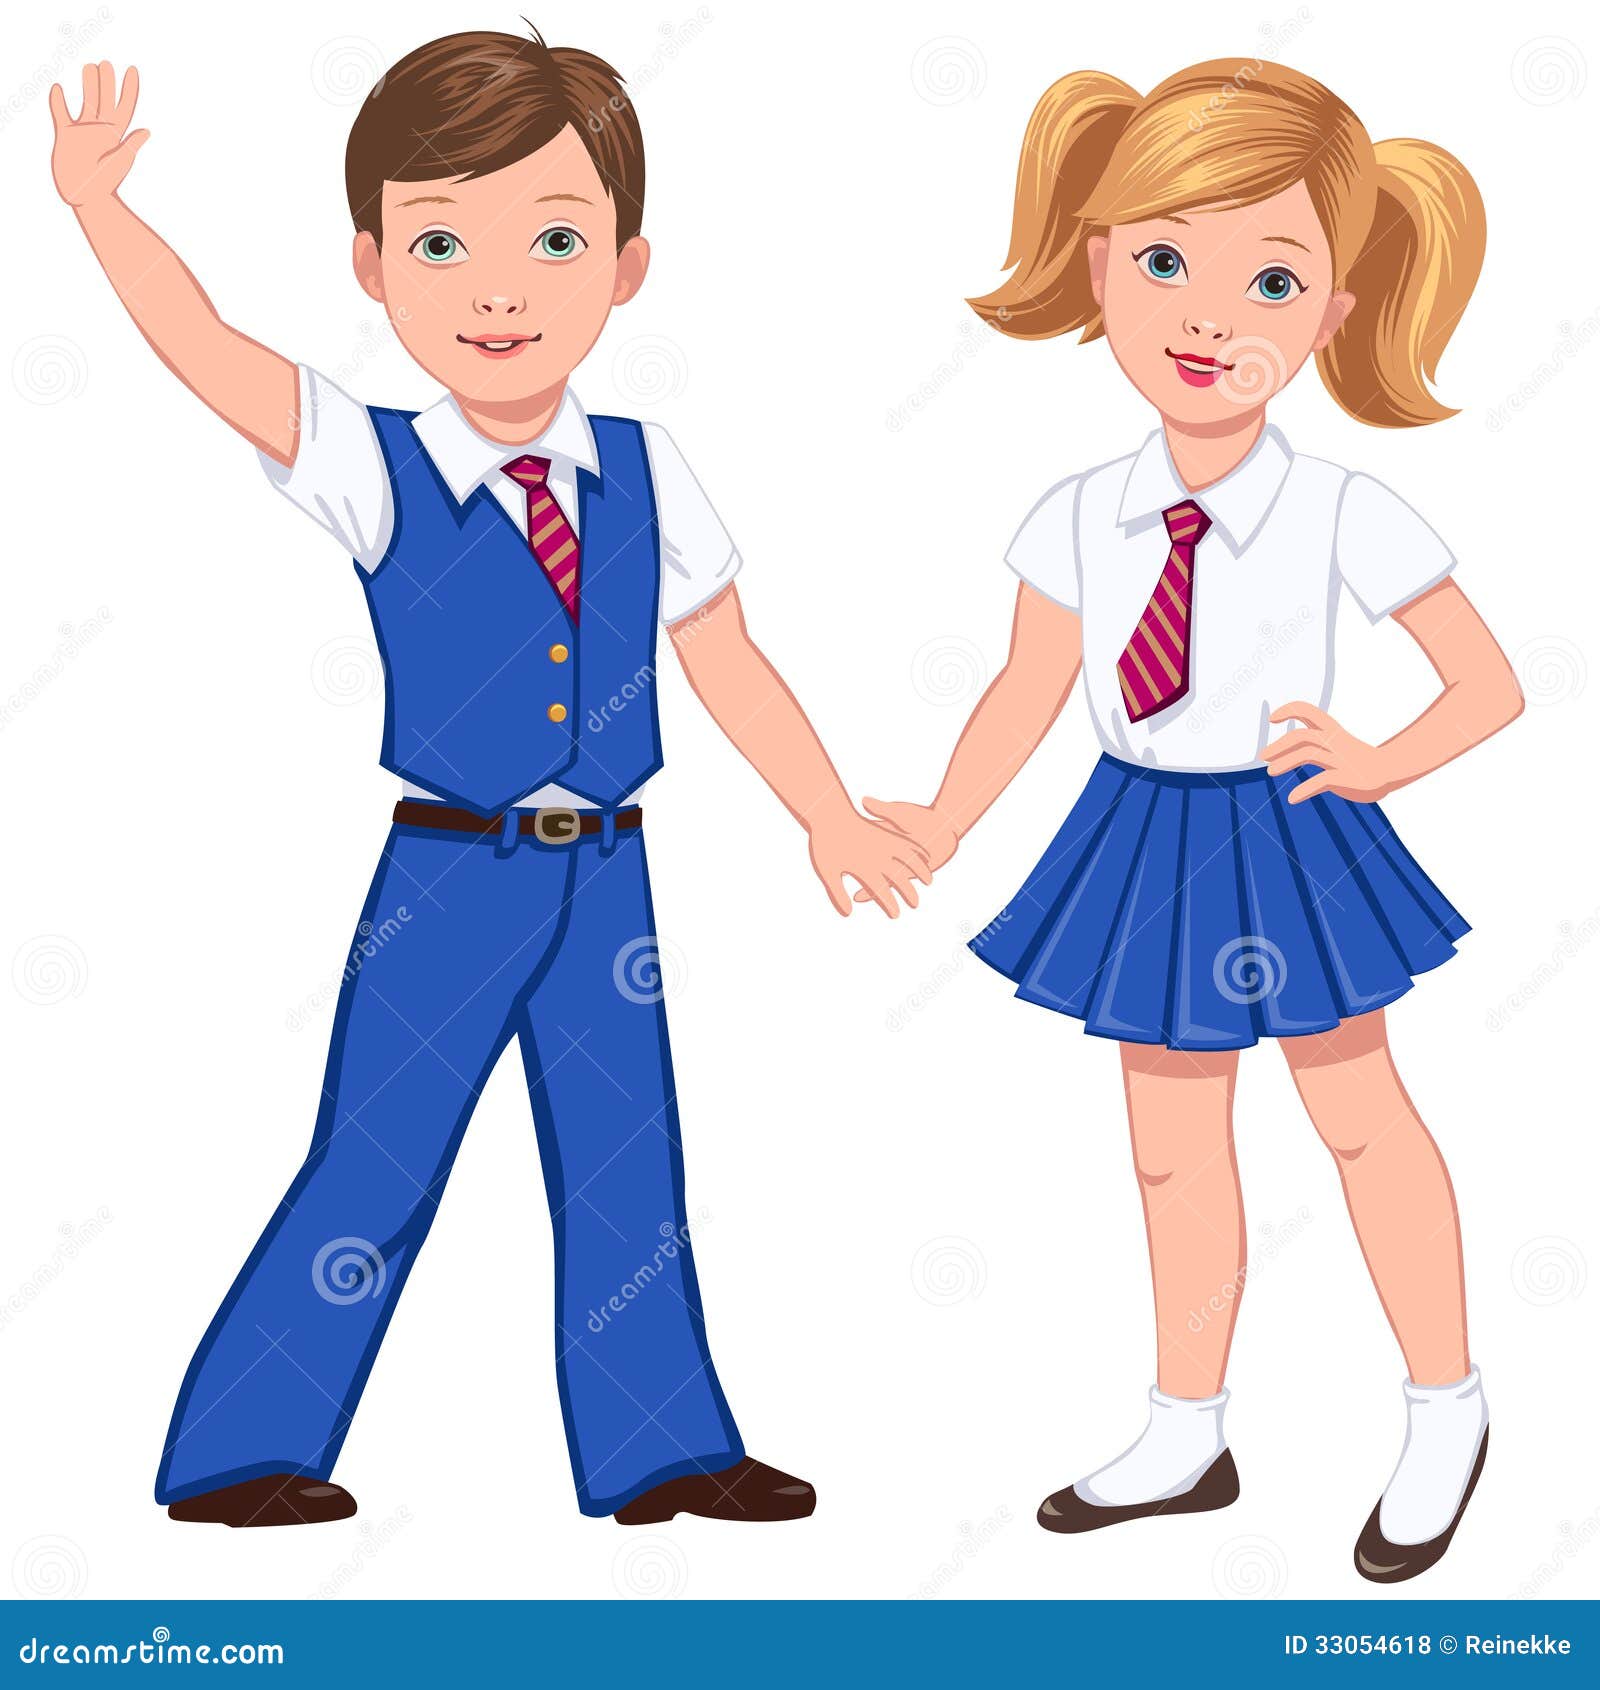 boy and girl student clipart - photo #41